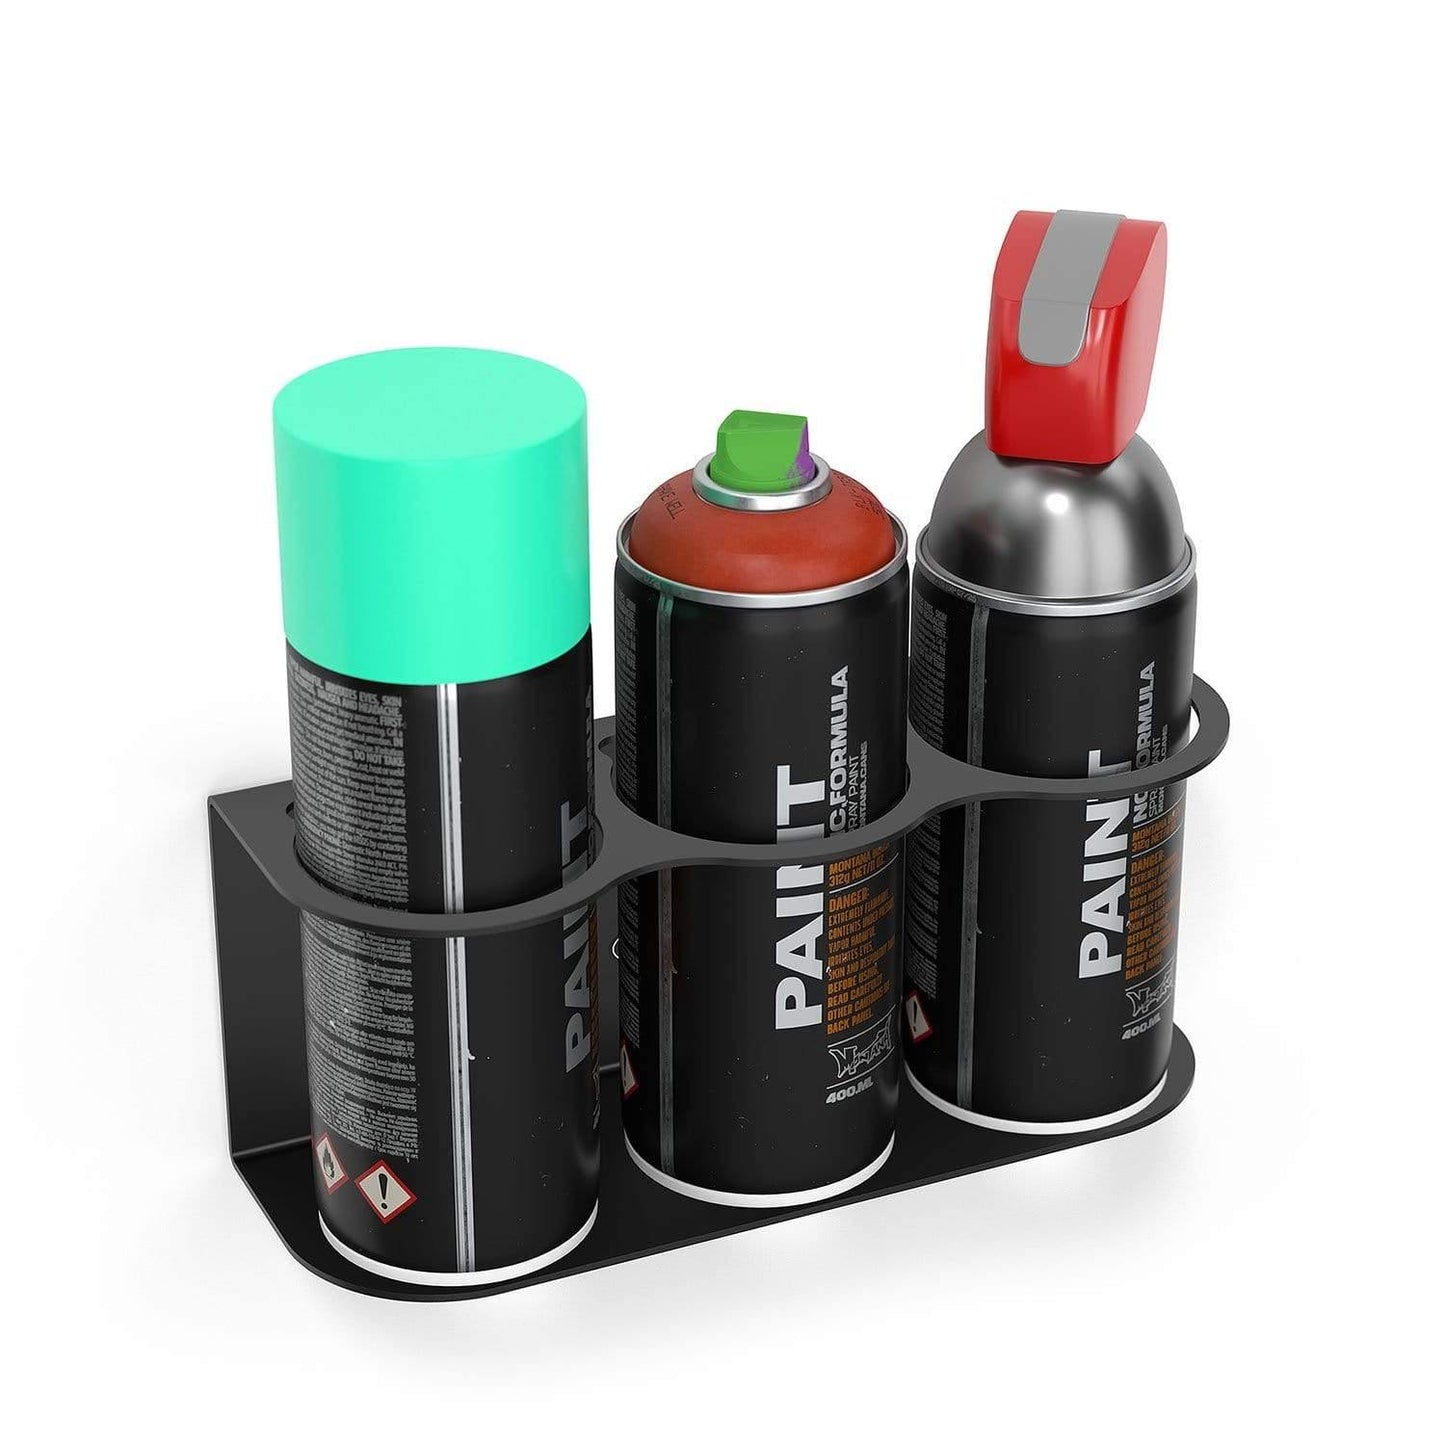 3 spray can wall mount holder for spray paint cans, lubrication cans, and spray glue for shed